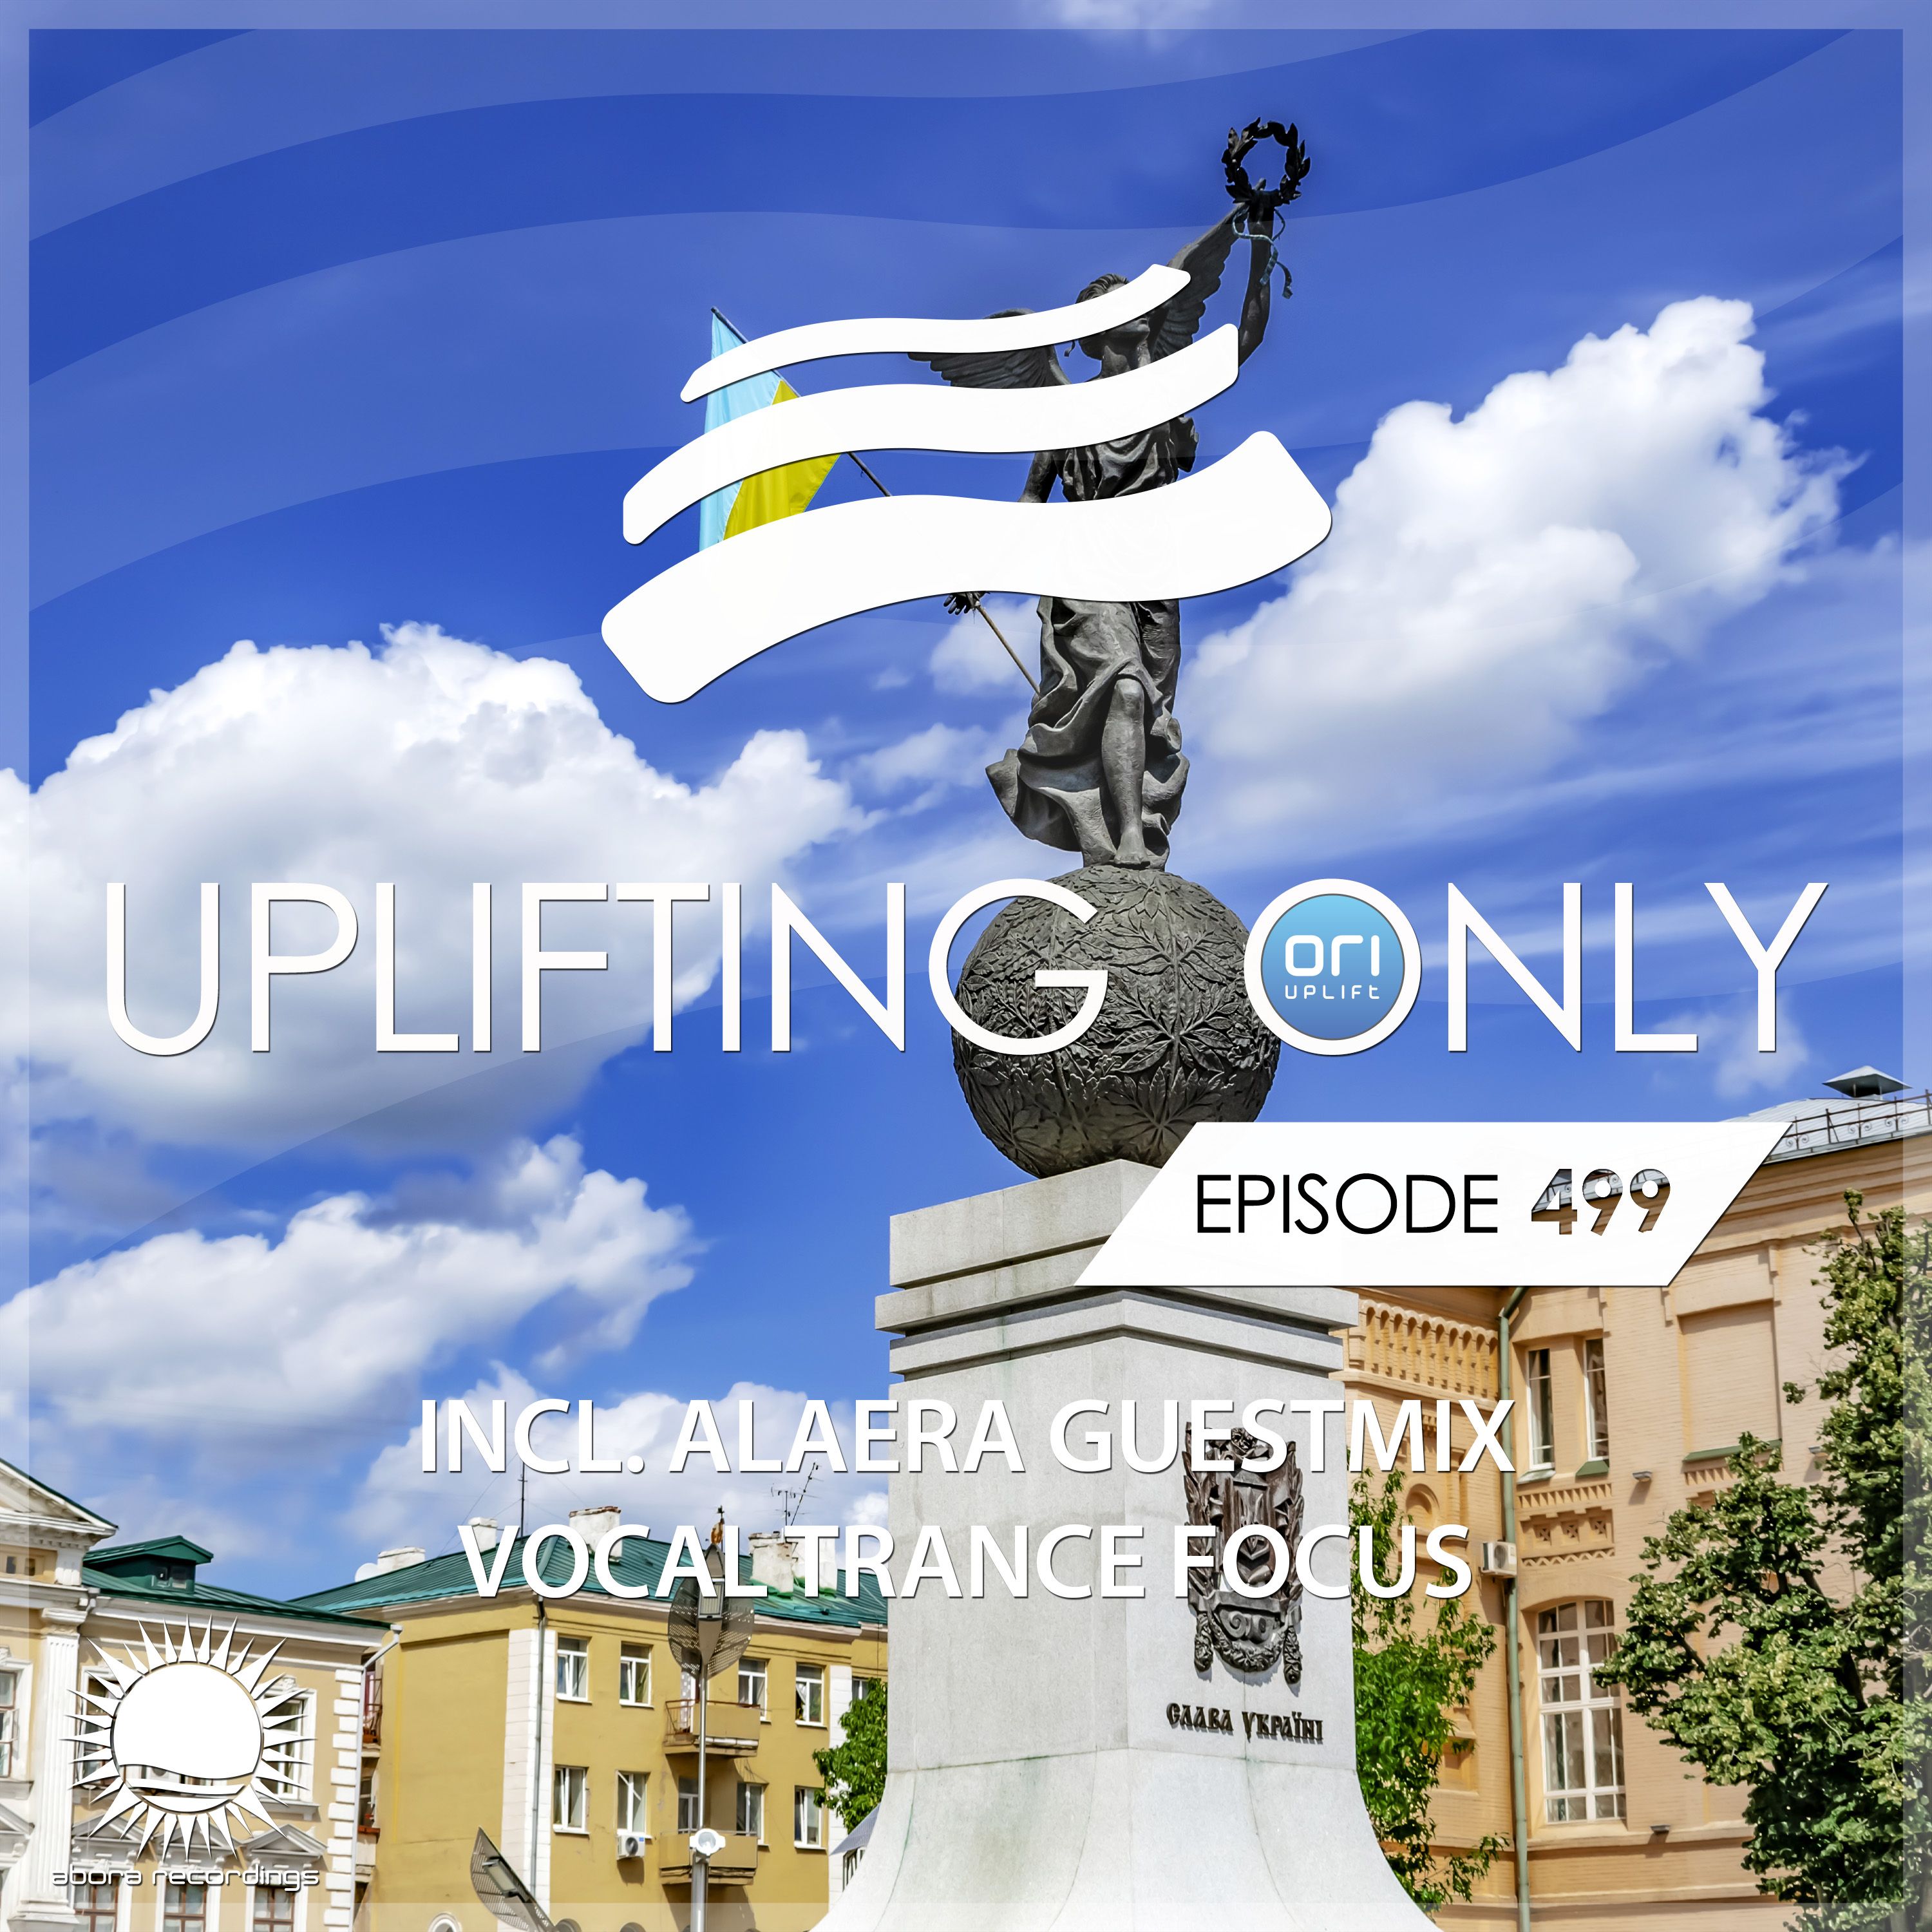 Uplifting Only 499 [No Talking] (incl. Alaera Guestmix) [Vocal Trance Focus] (Sept 1, 2022)